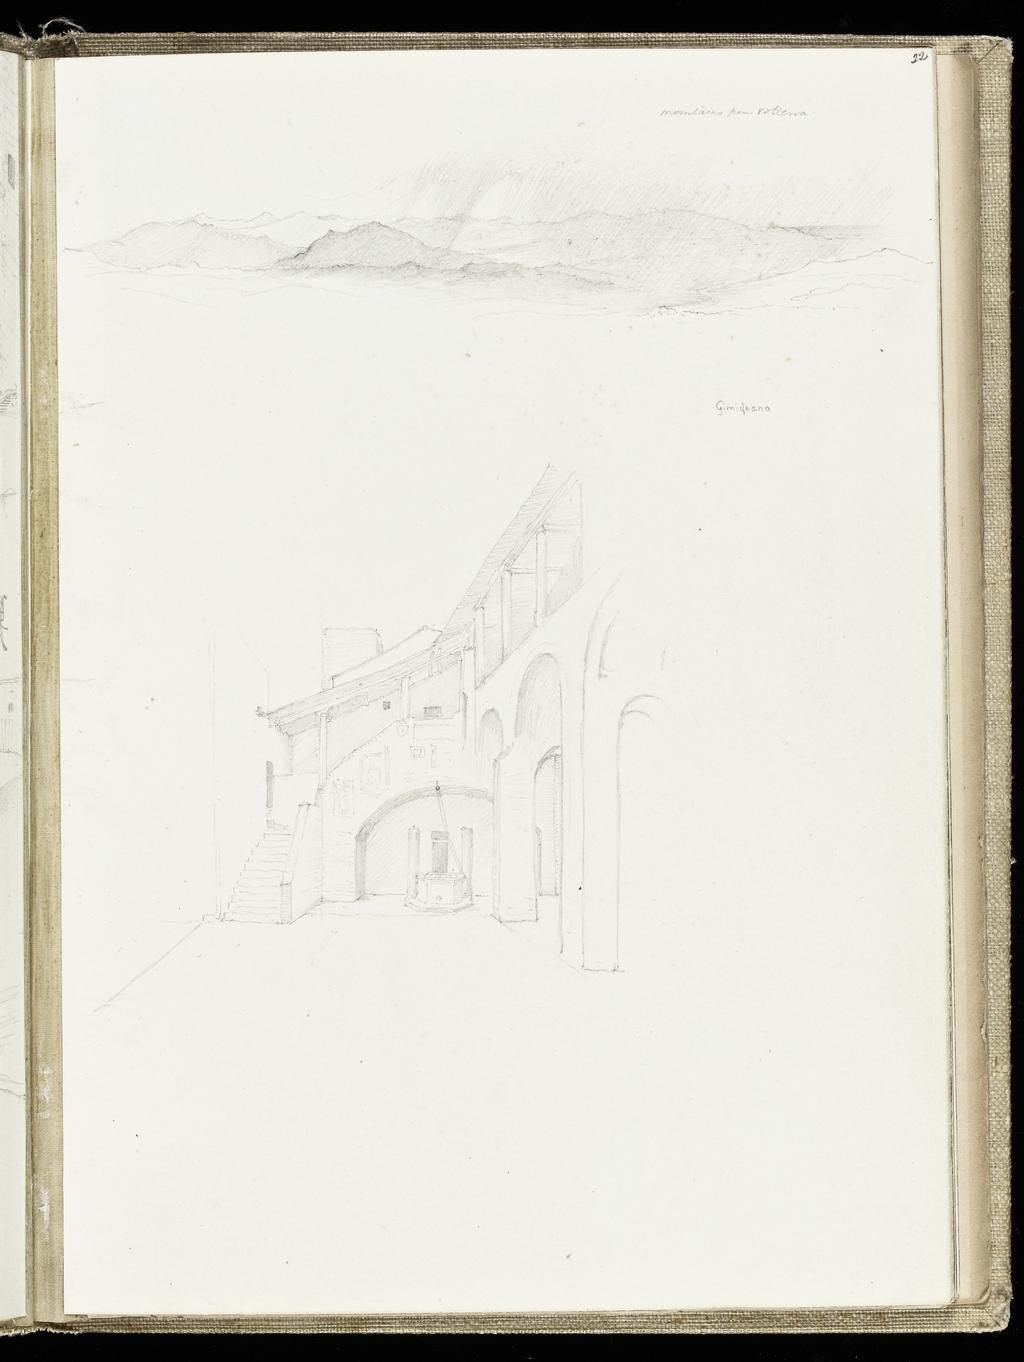 An image of Sketchbook. Recto: 'Mountain from Volterra'; below, study of a building with archways below and columnar supports above. Verso: Sketch of interior of a church. Burne-Jones, Edward (British, 1833-1898). Coverboards covered with white linen. Front cover has horizontal slits at the upper and lower right sides. Off-white paper. Collocation: each sheet is separately taped to the binding; there are 28ff and a single beige sheet on either side of these. Front and back leaves are blank, recto and verso. Height, sheet size, 179 mm, width, sheet size, 254, mm, 1873.